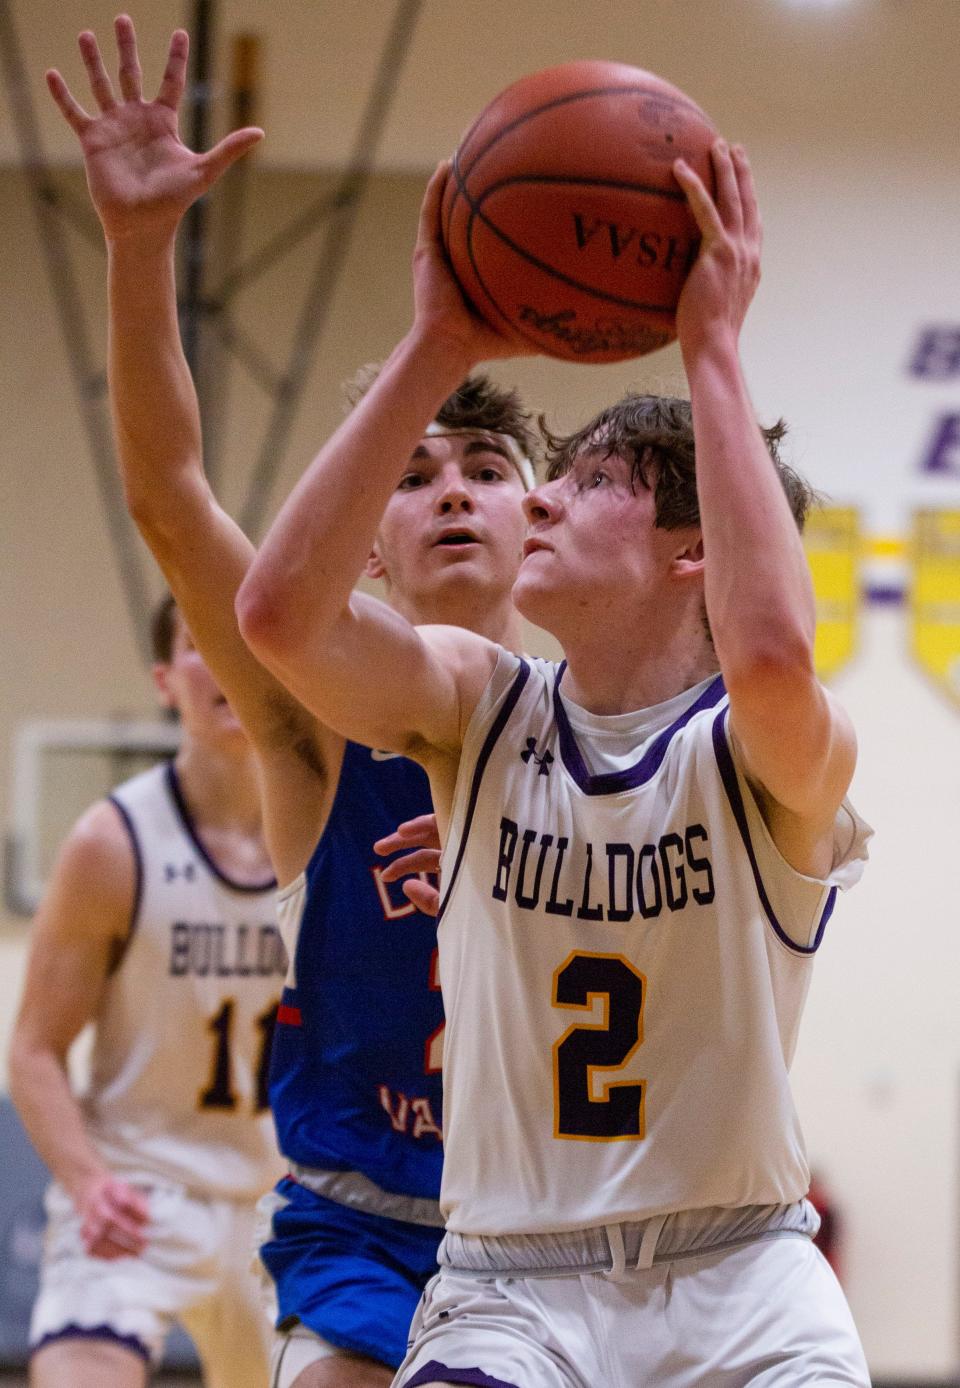 Bloom-Carroll's Jackson Wyant (2) tries to get to the basket for a shot against the Licking Valley defense in varsity boys basketball action at Bloom-Carroll High School in Carroll, Ohio on February 23, 2022. Bloom-Carroll defeated Licking Valley 62-45.